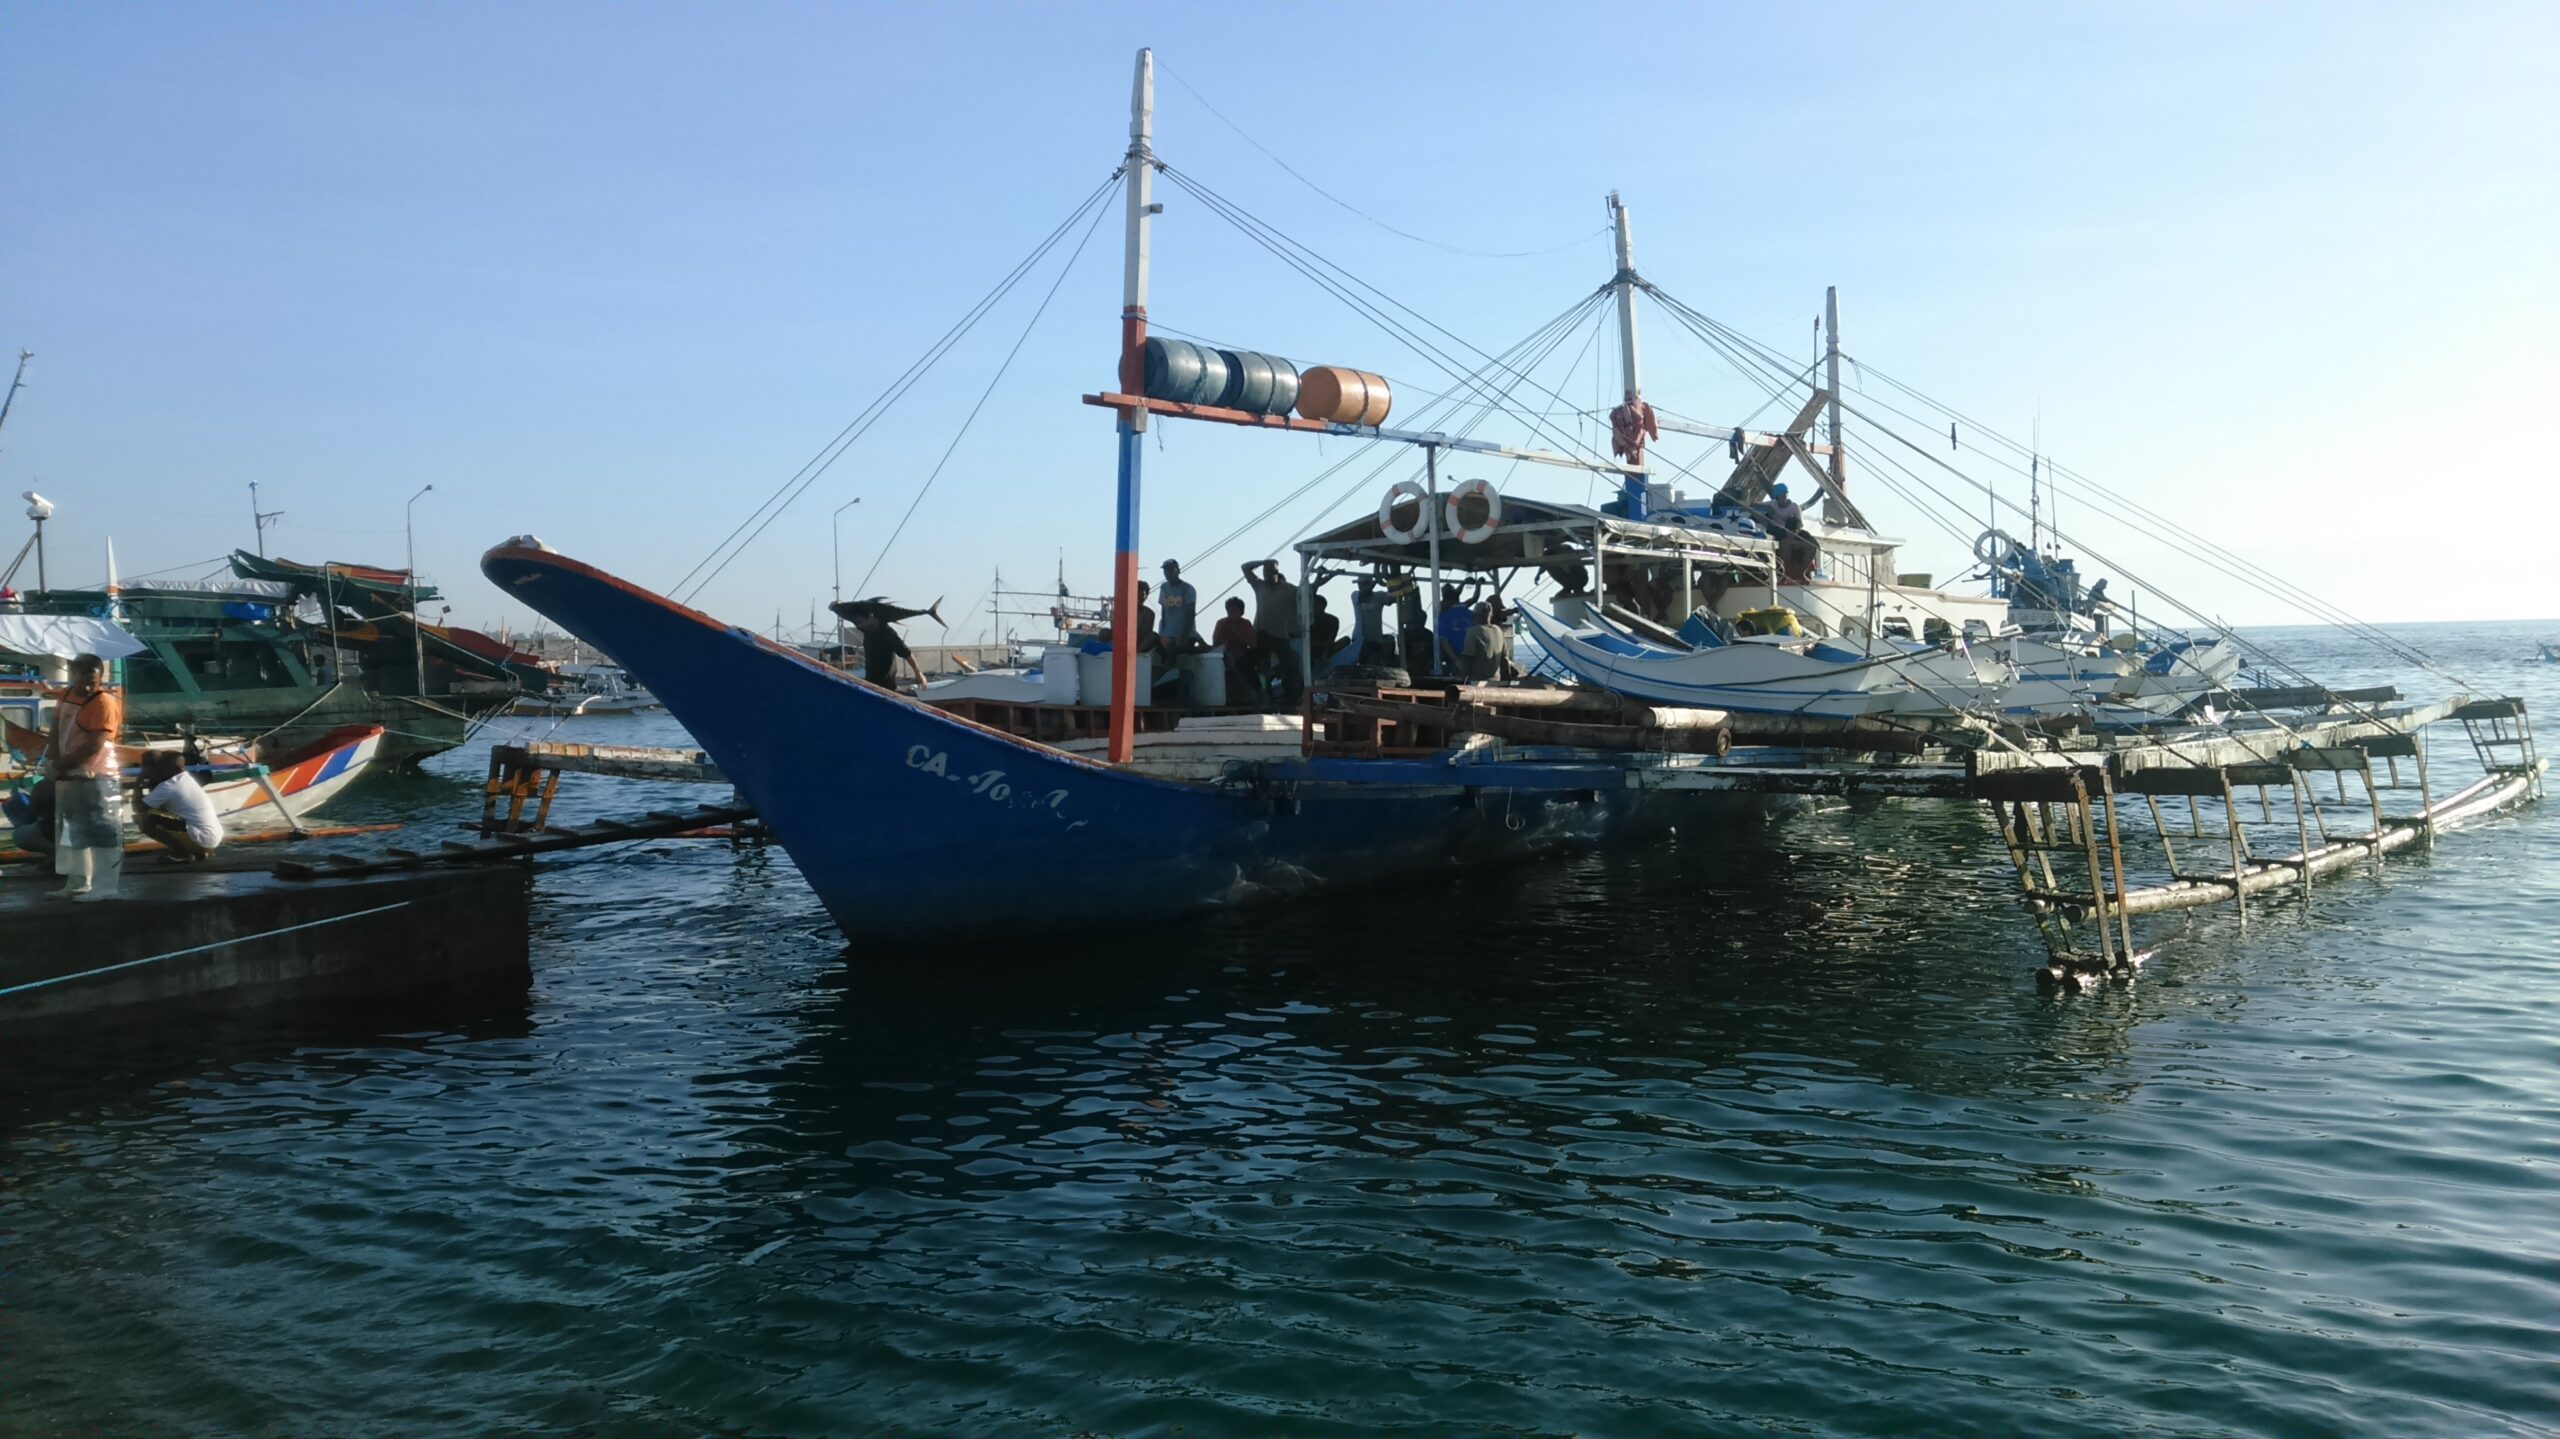 Hazards in labor contracting: What about the PH tuna industry?